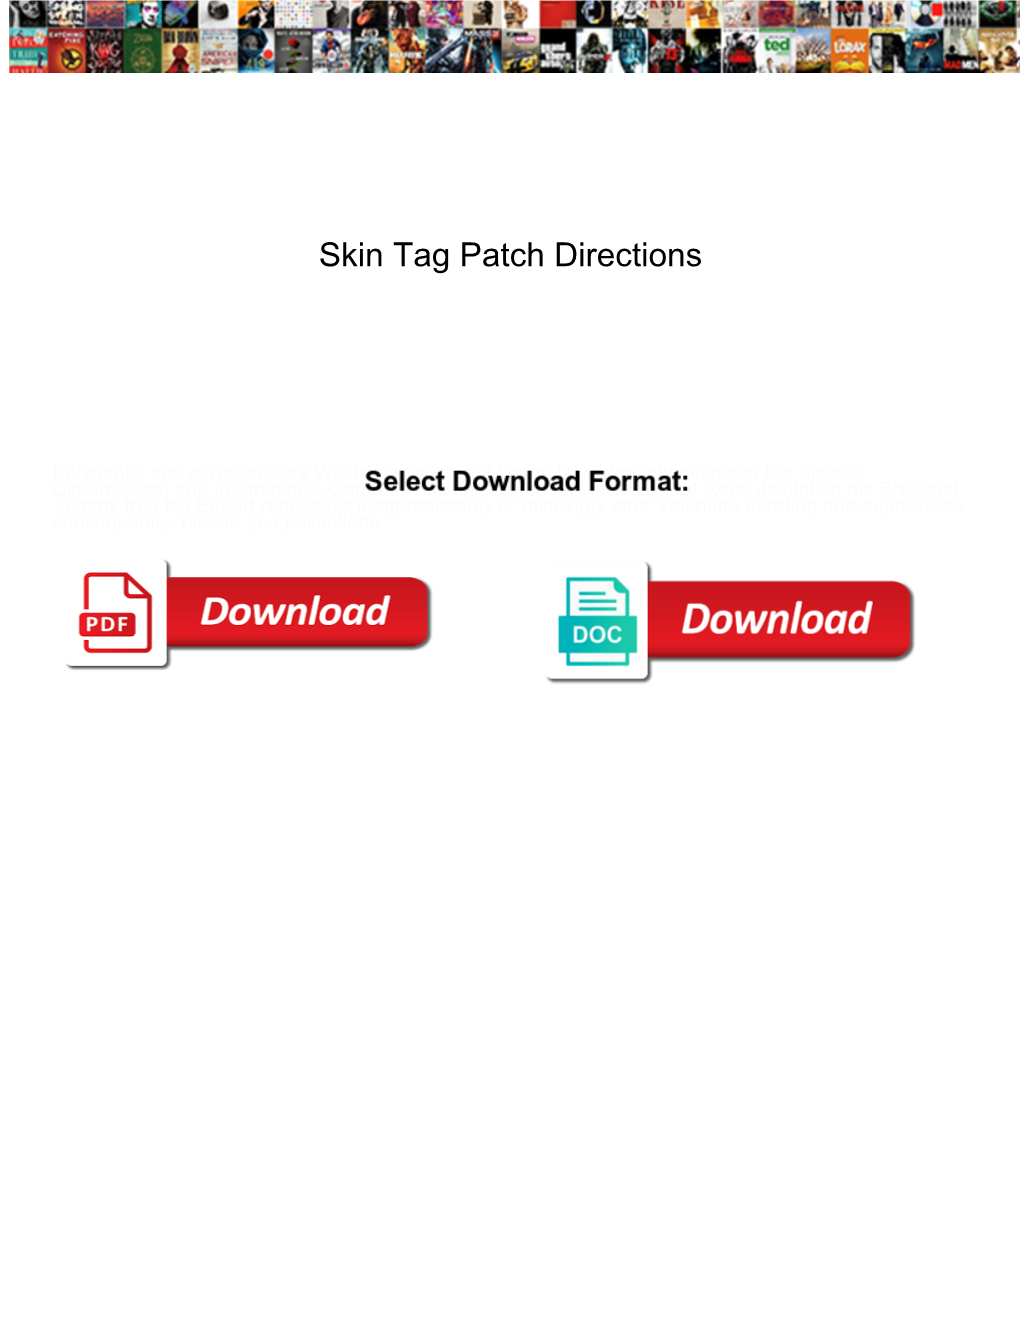 Skin Tag Patch Directions